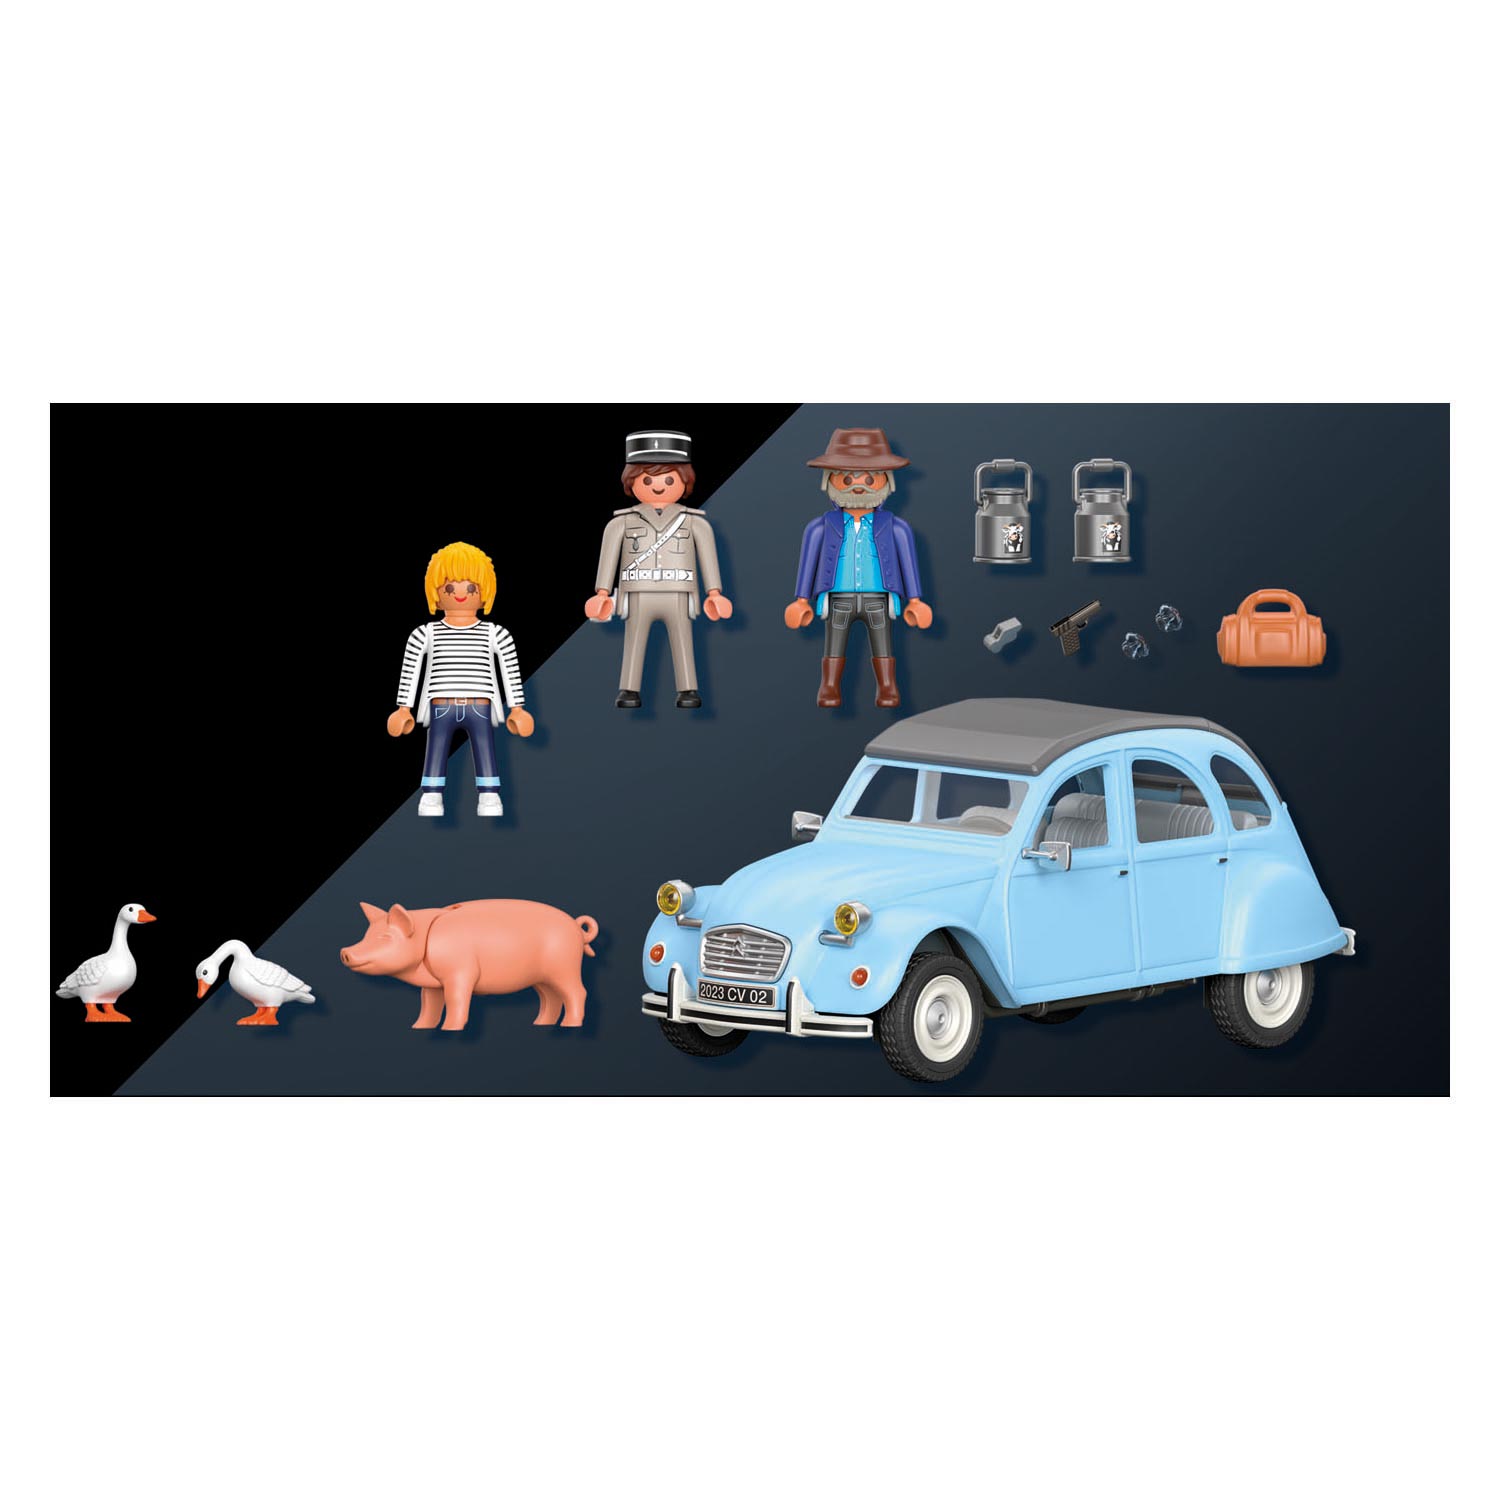 Playmobil Citroën 2CV ,70640, original, clicks, gift, child, girl, toy,  collection, shop, with box, official product, man, woman - AliExpress